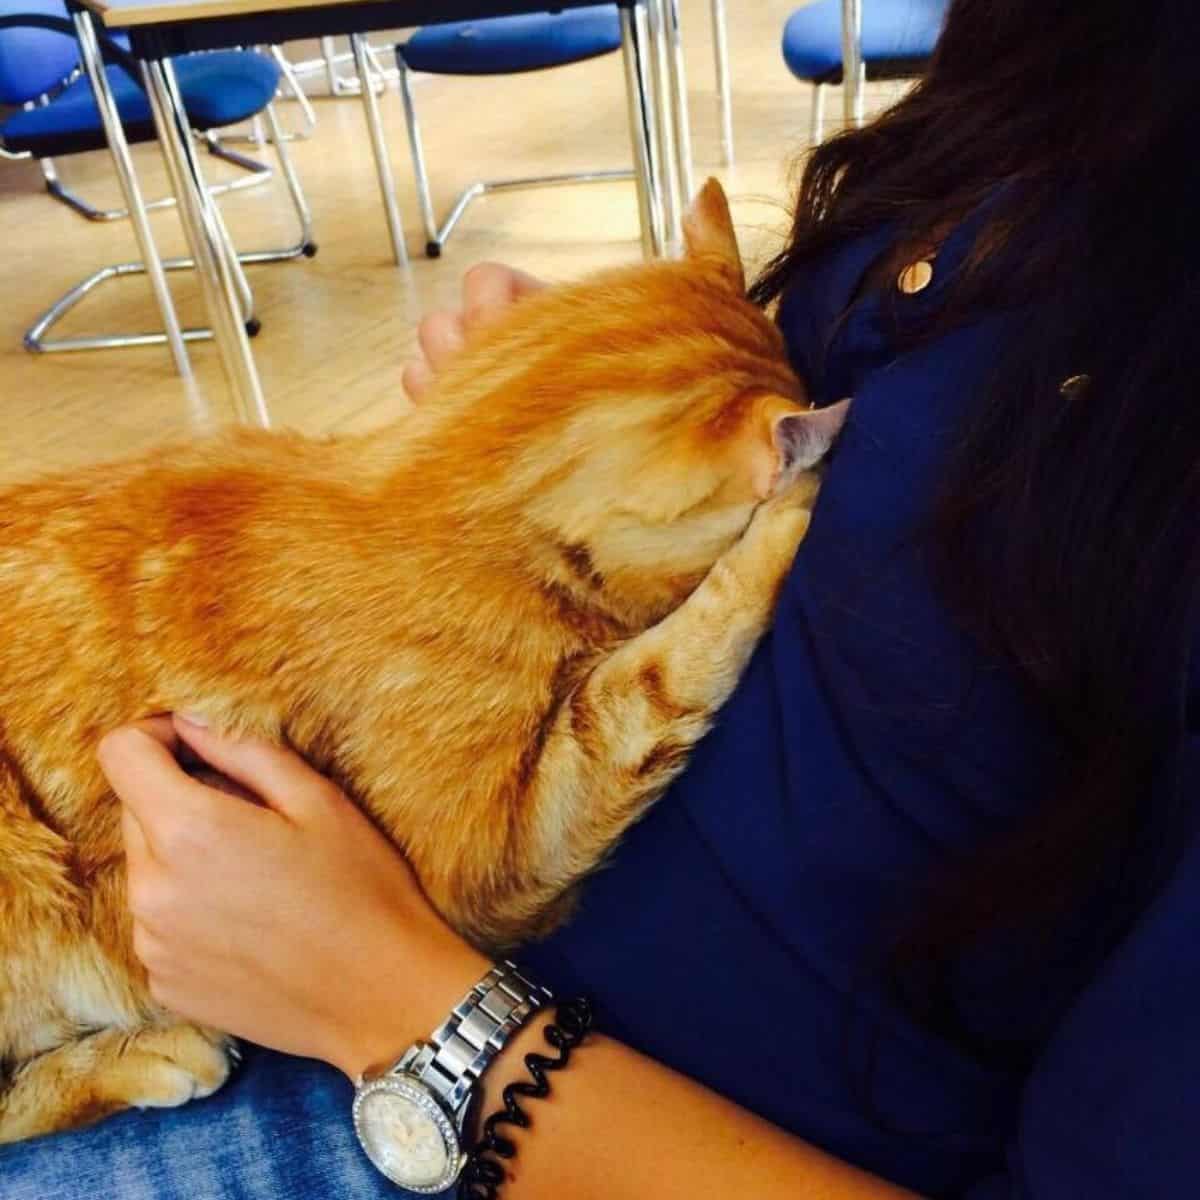 the cat is lying on the lap of the student